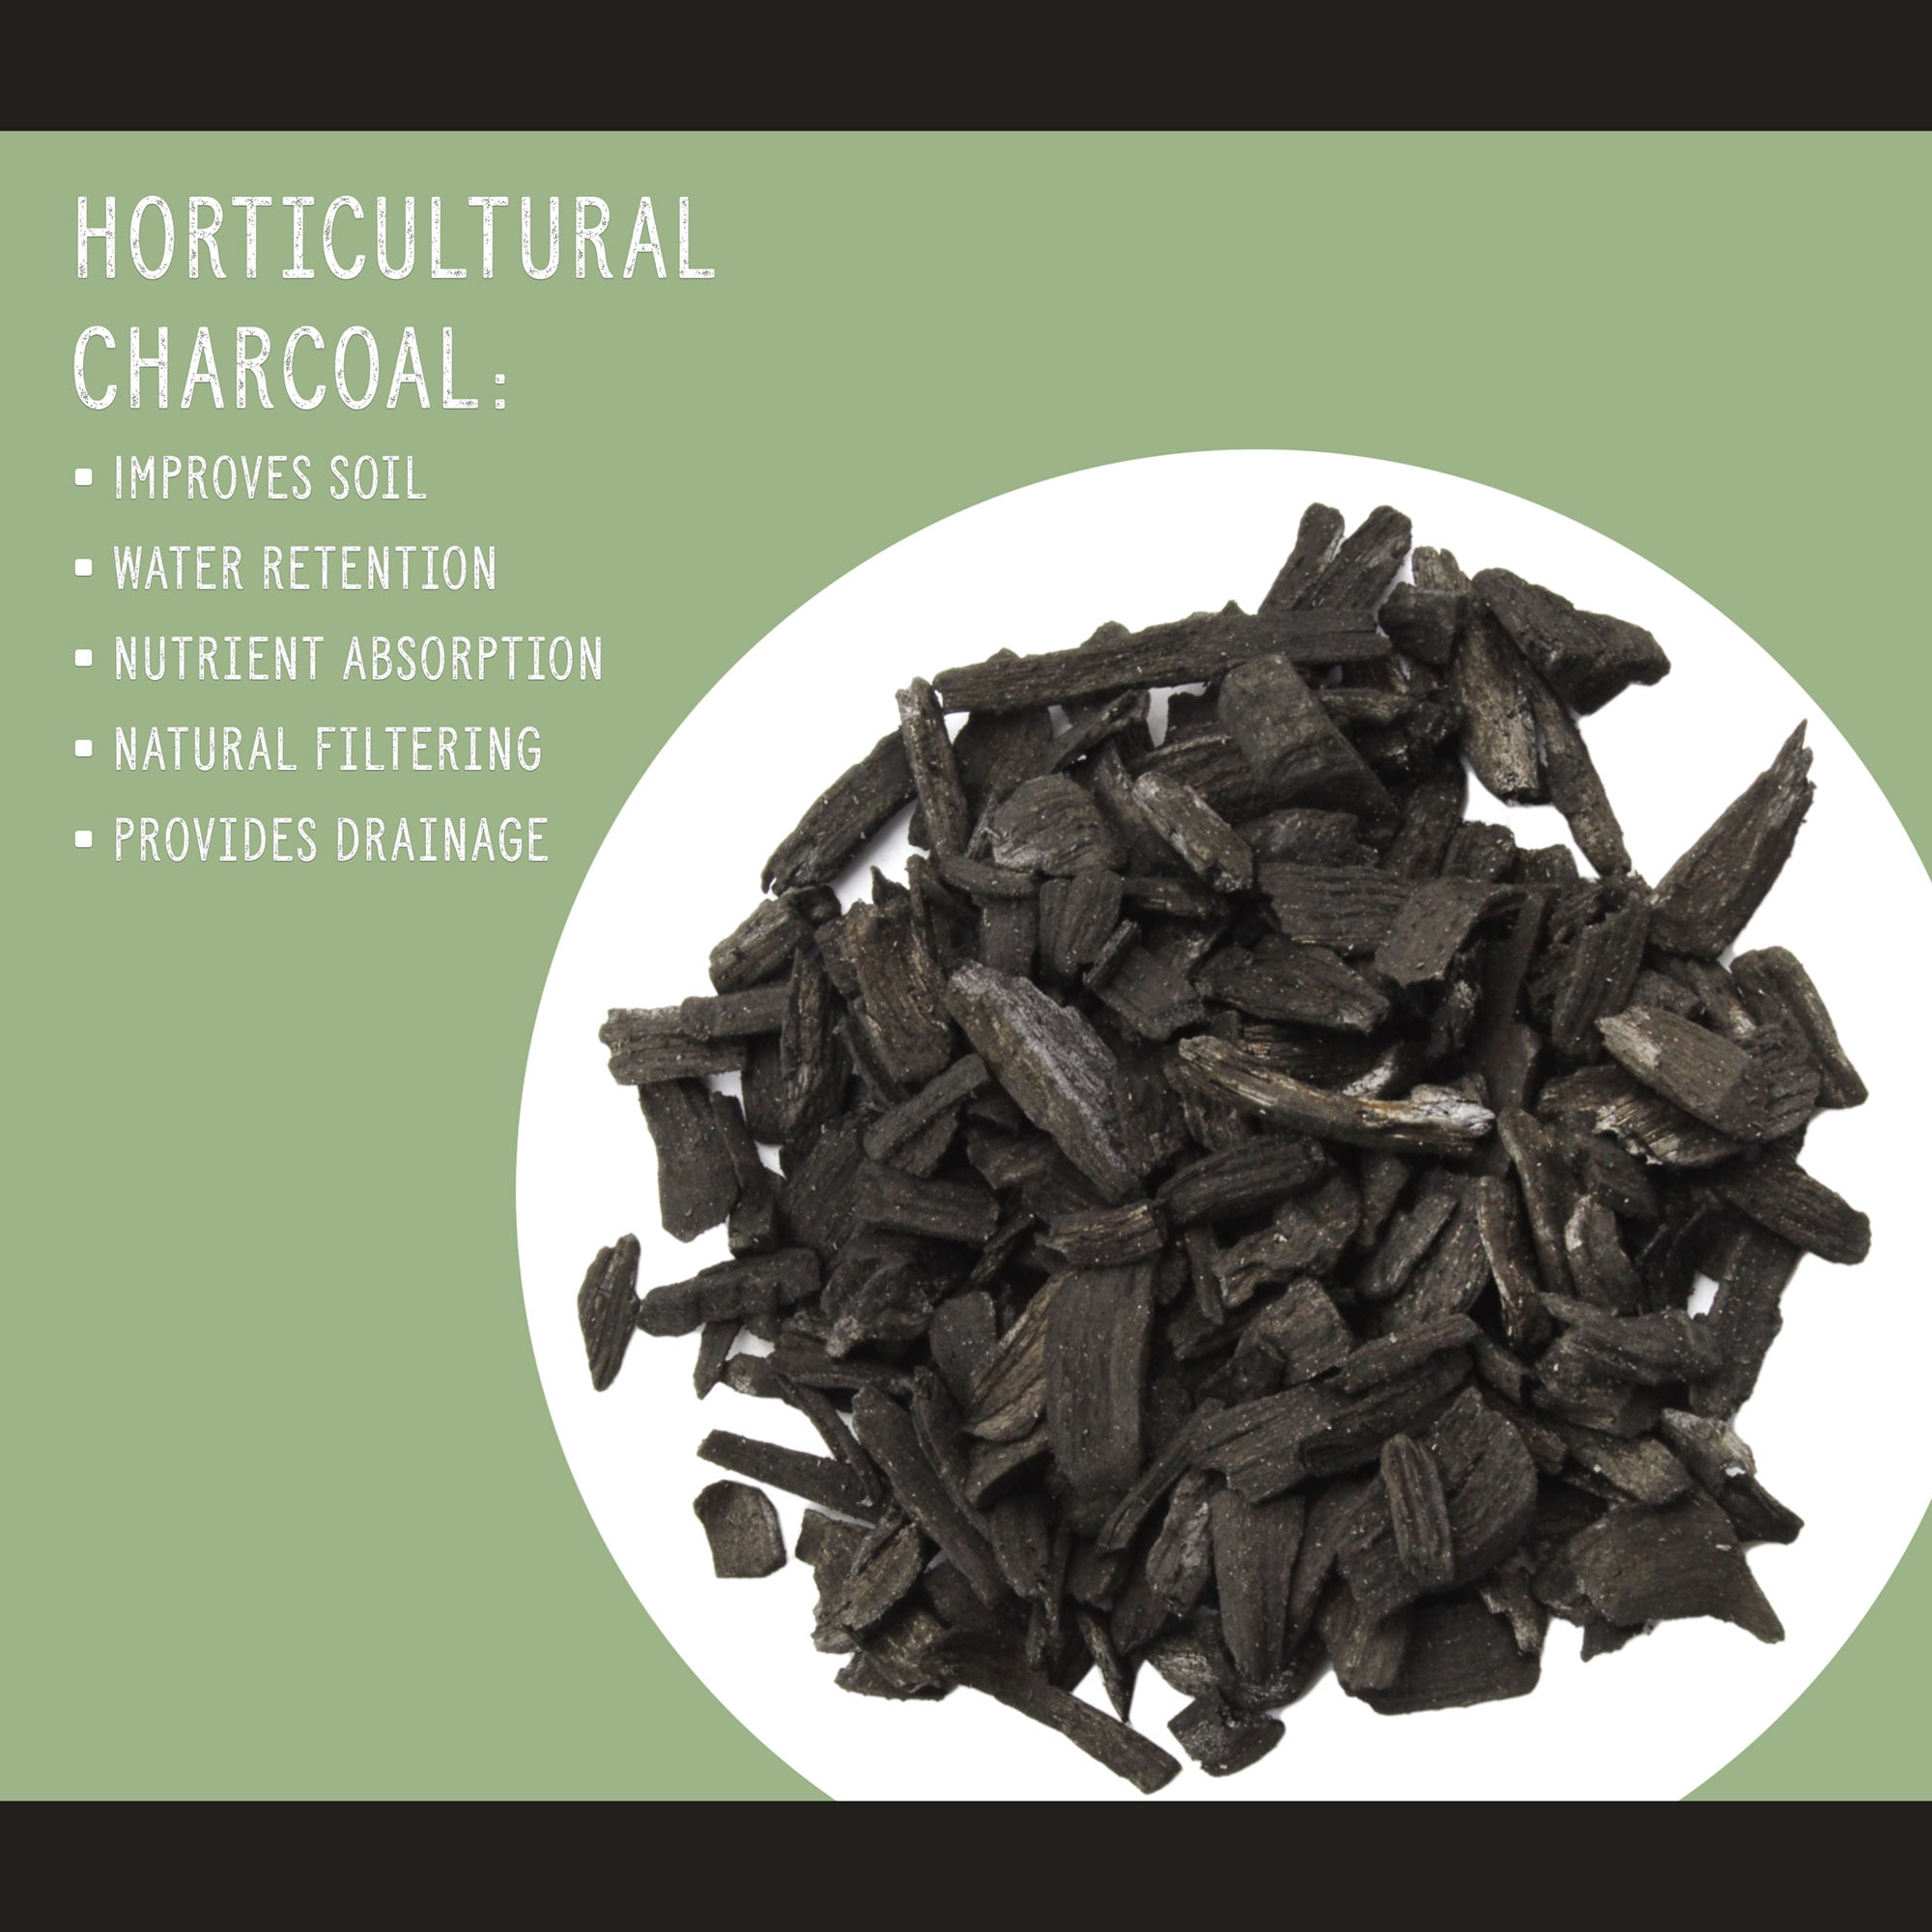 Cloflo Horticultural Charcoal for Indoor Plants Soil Amendment for Orchids,  Terrariums, and Gardening 1-5 Qt 